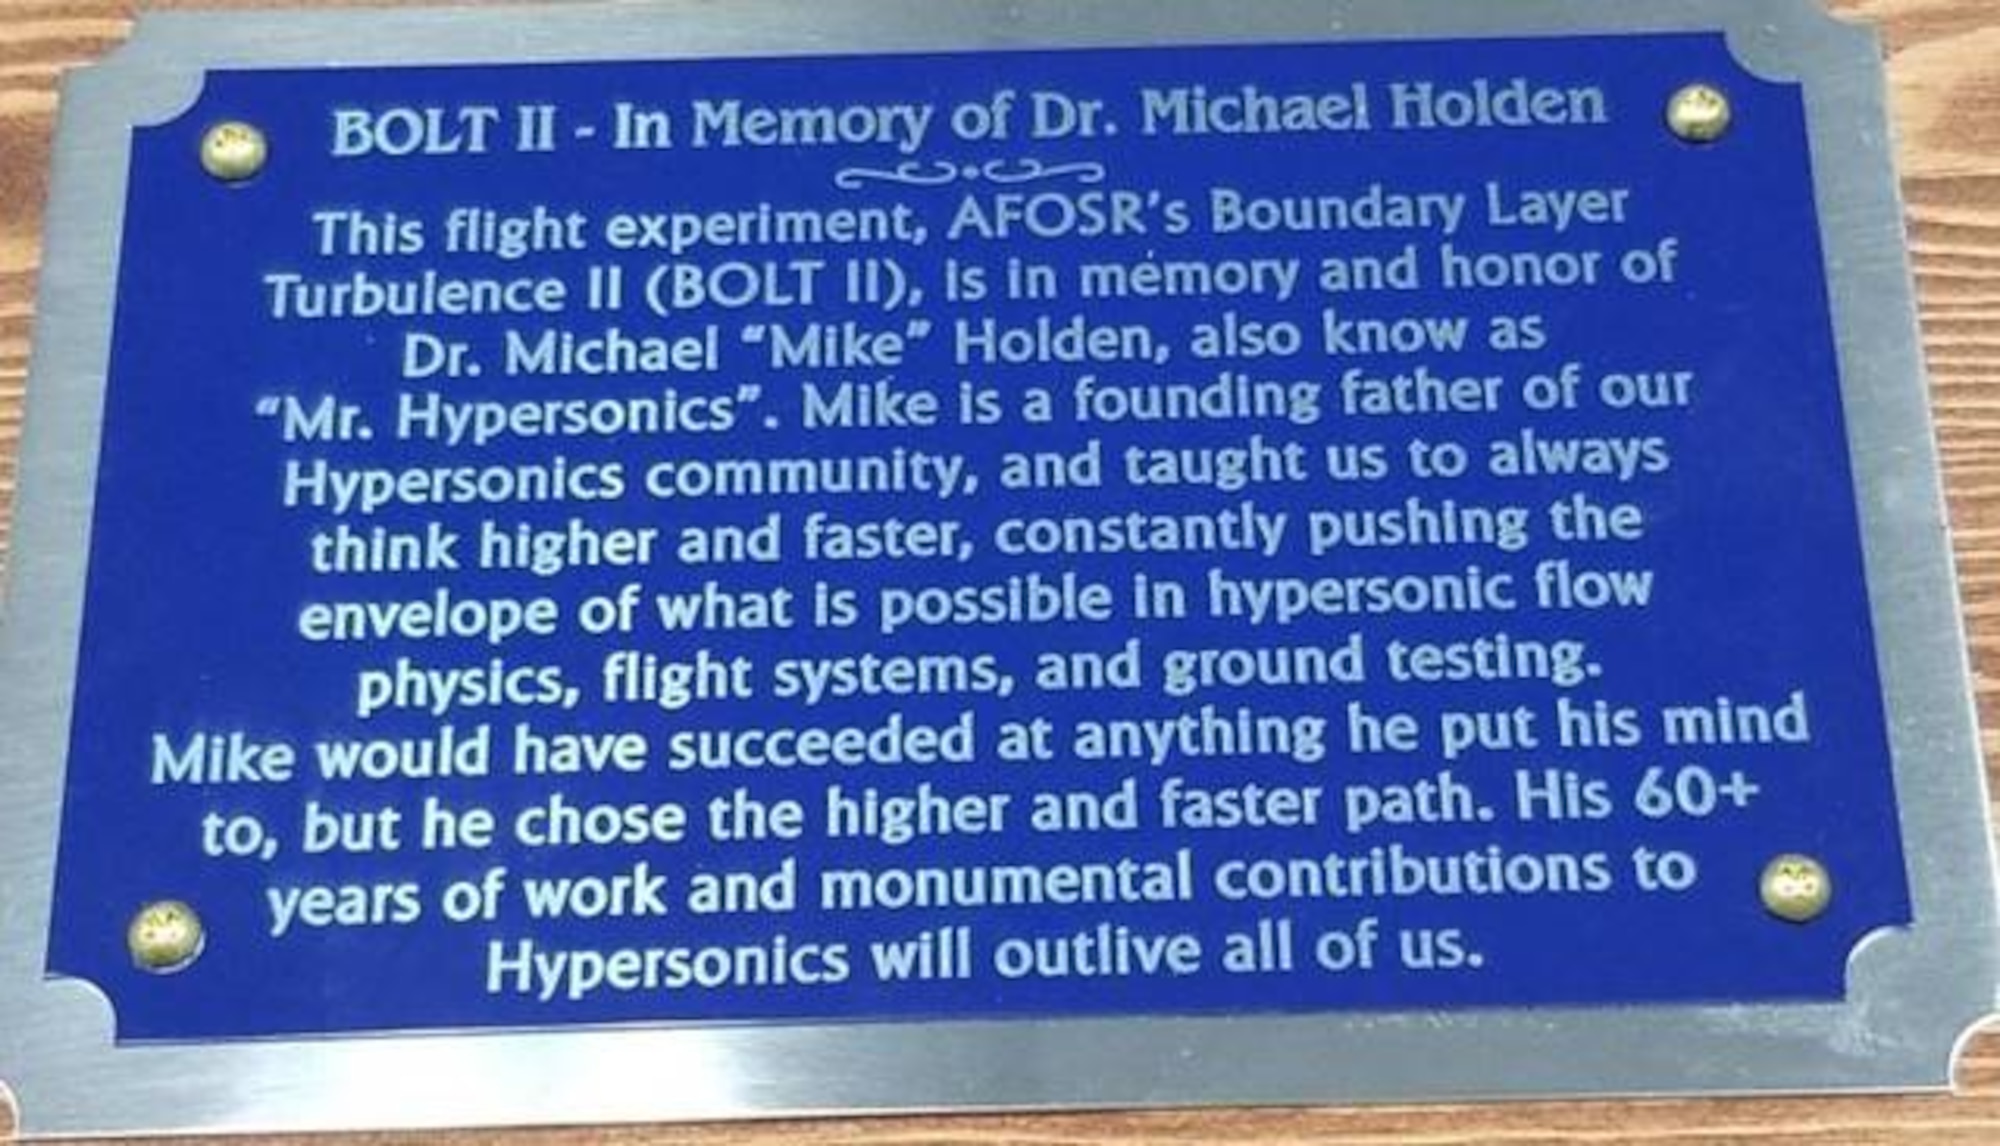 A plaque dedicating the BOLT II flight to the late Mike Holden, who was a major contributor to the field of hypersonics. (Courtesy Photo)